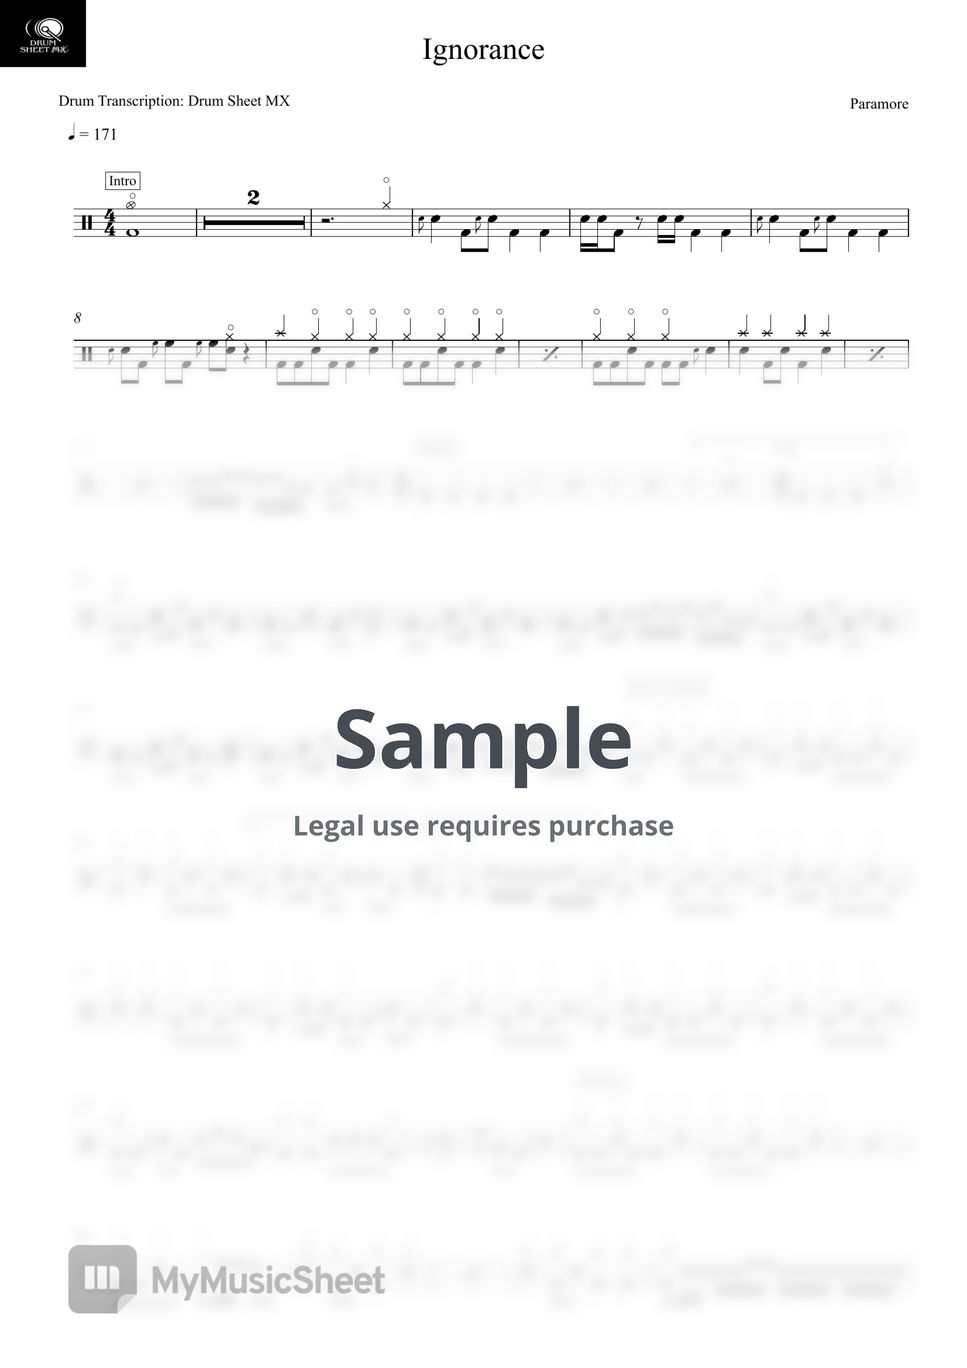 Paramore - Ignorance by Drum Sheet MX